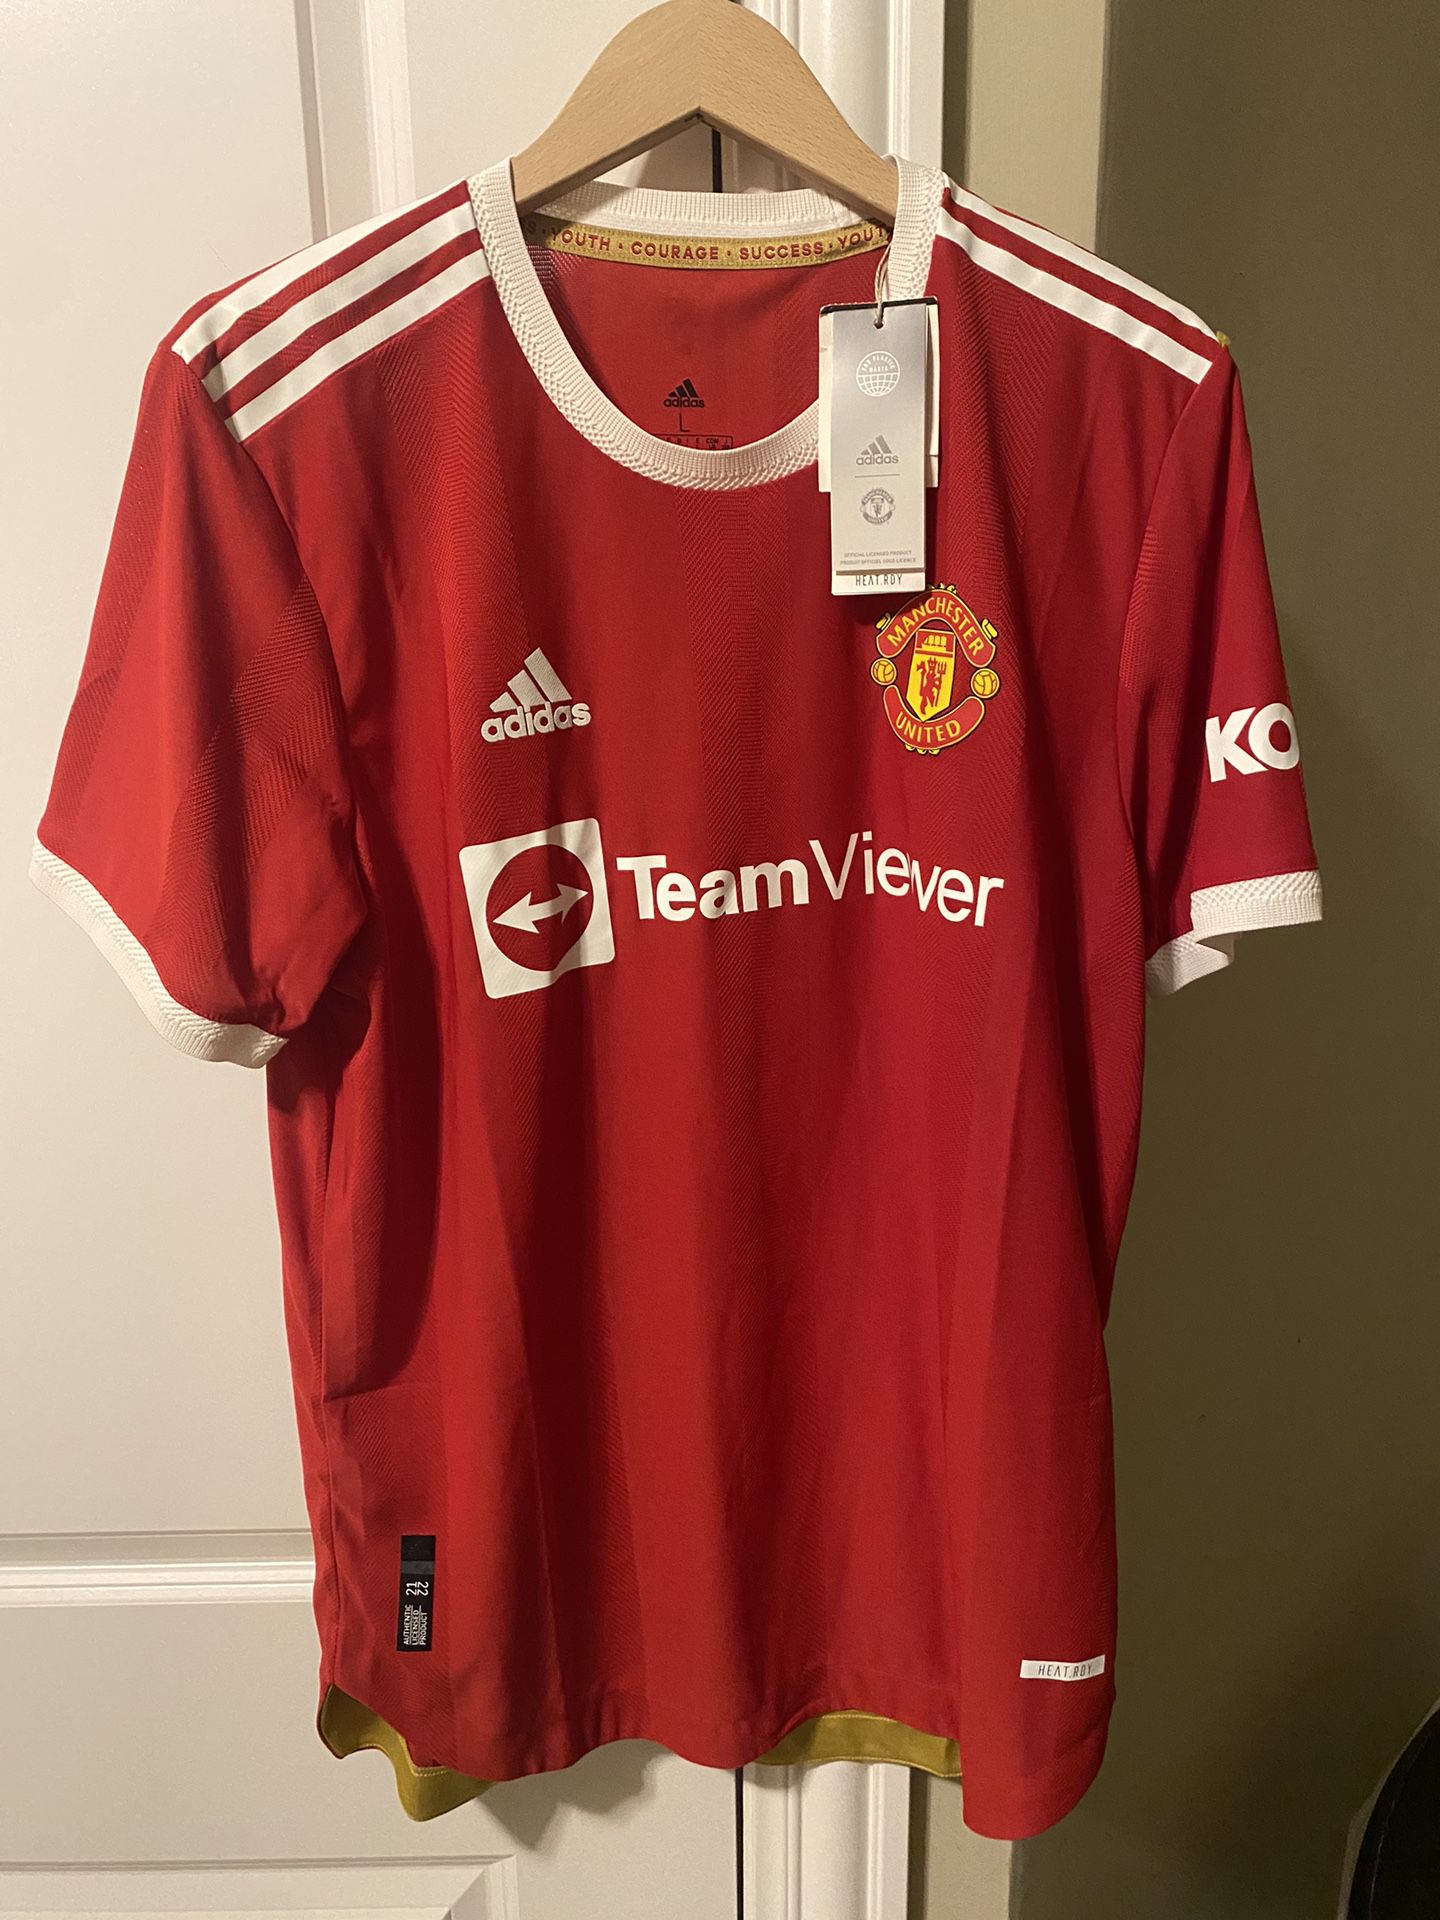 MANCHESTER UNITED (ADIDAS) MENS AUTHENTIC SOCCER JERSEY (LRG) NWT RED $130 TAGS